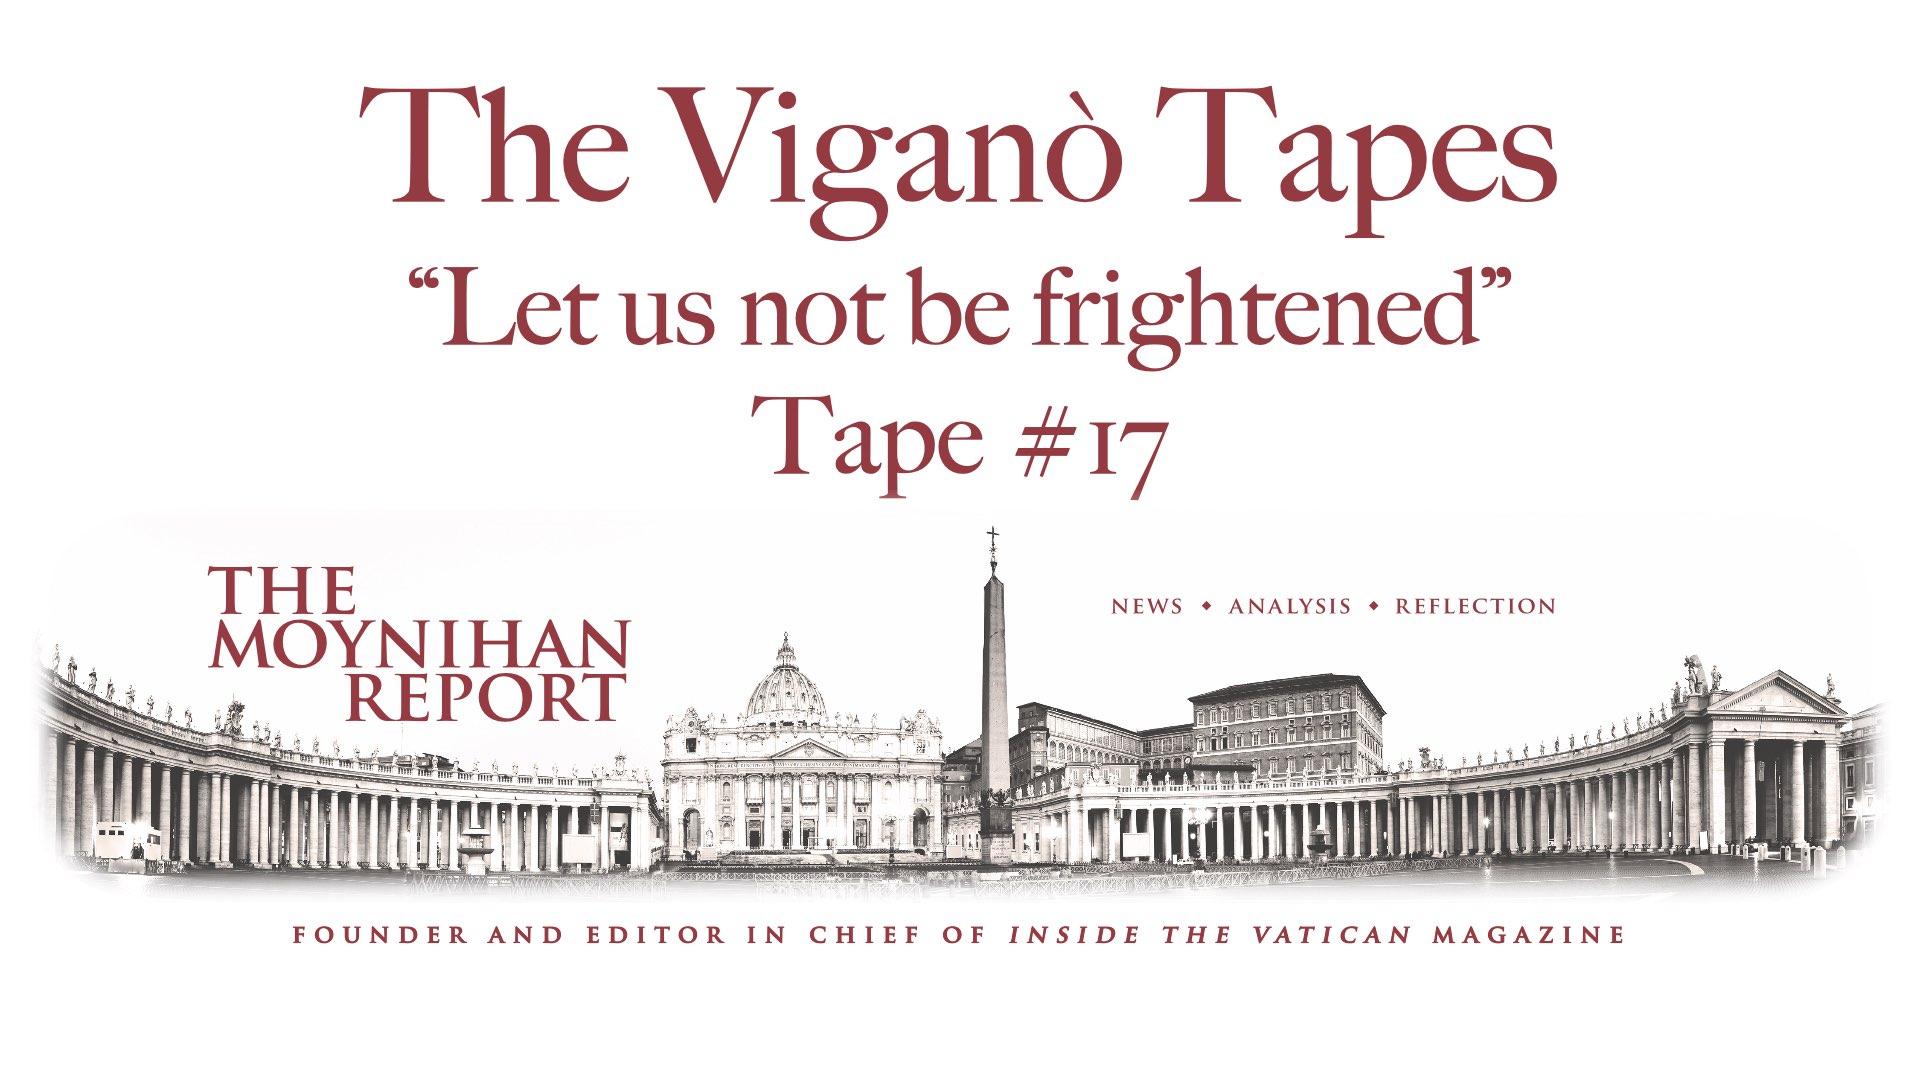 The Vigano Tapes #17